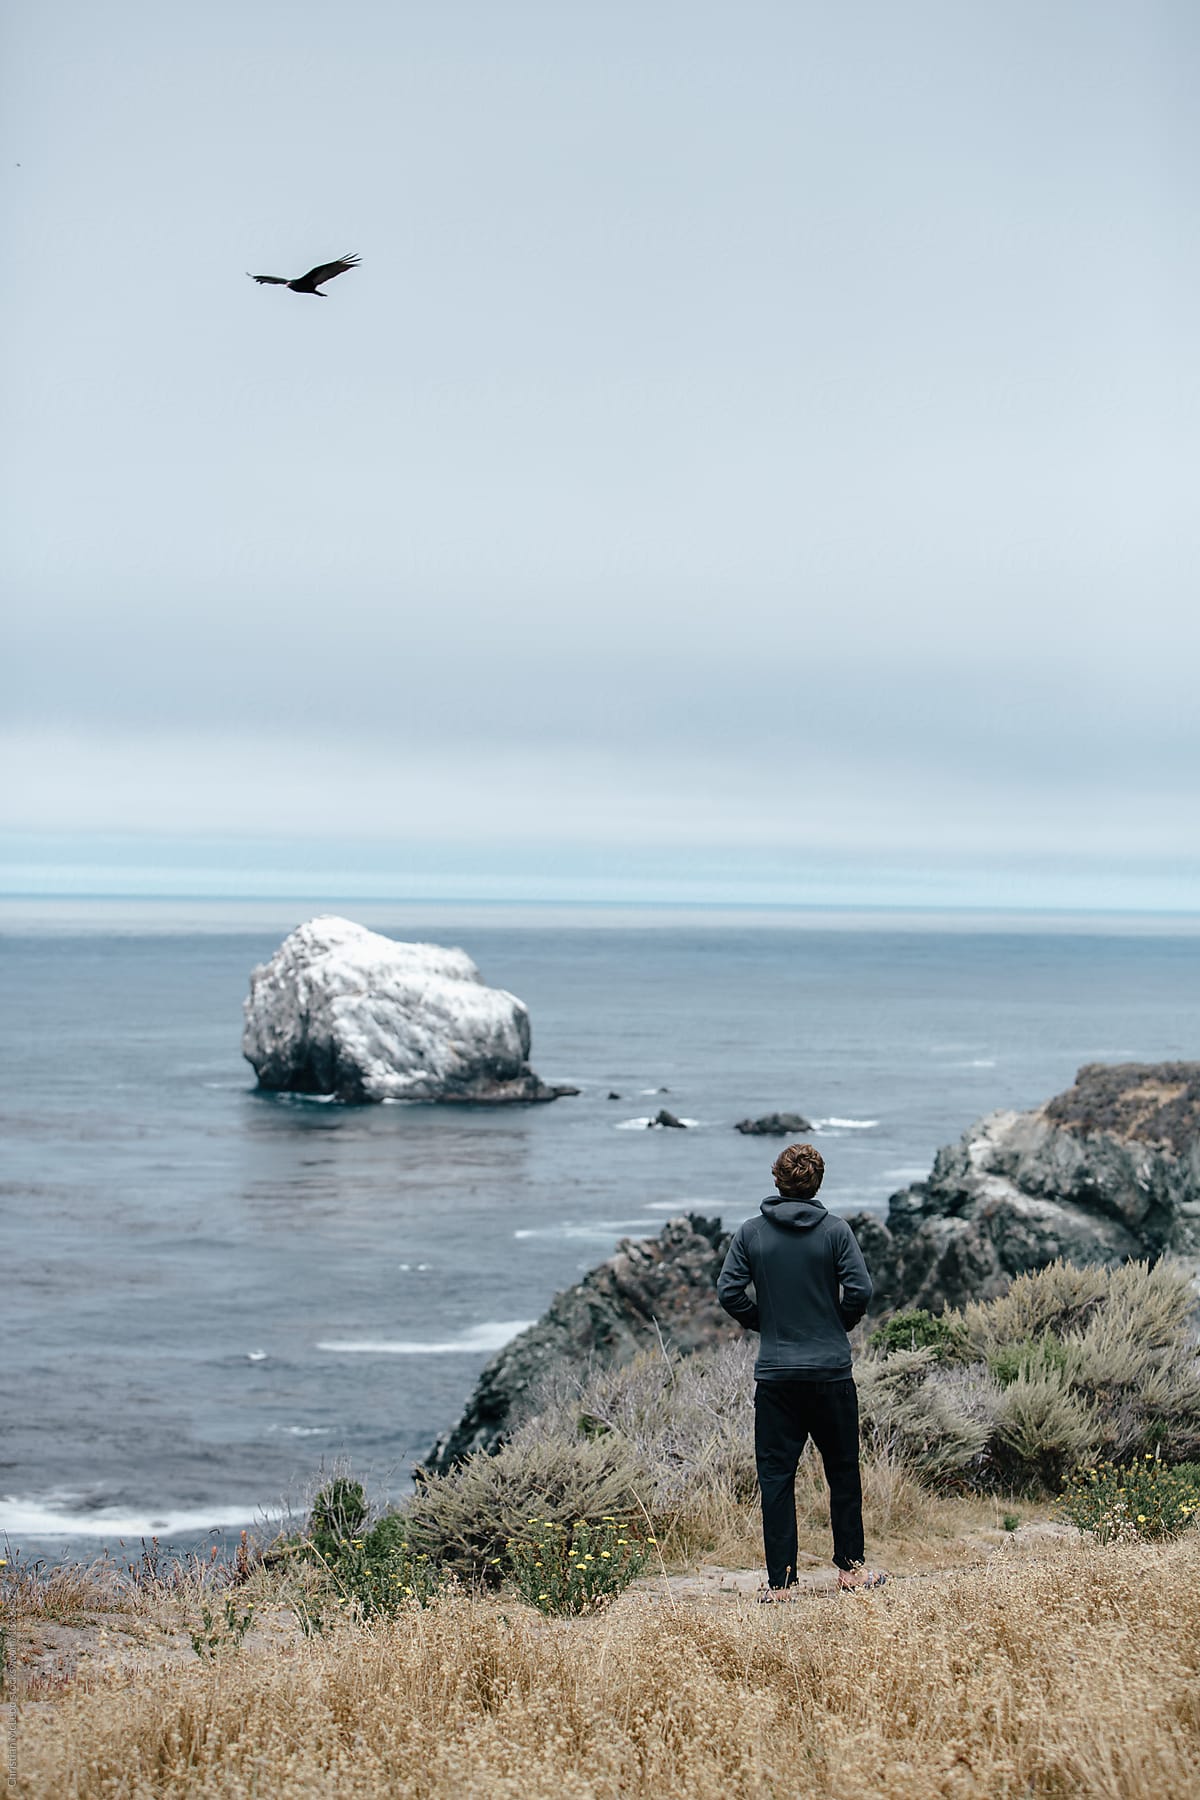 Man stands by the cliffside and watches a hawk fly over the ocean